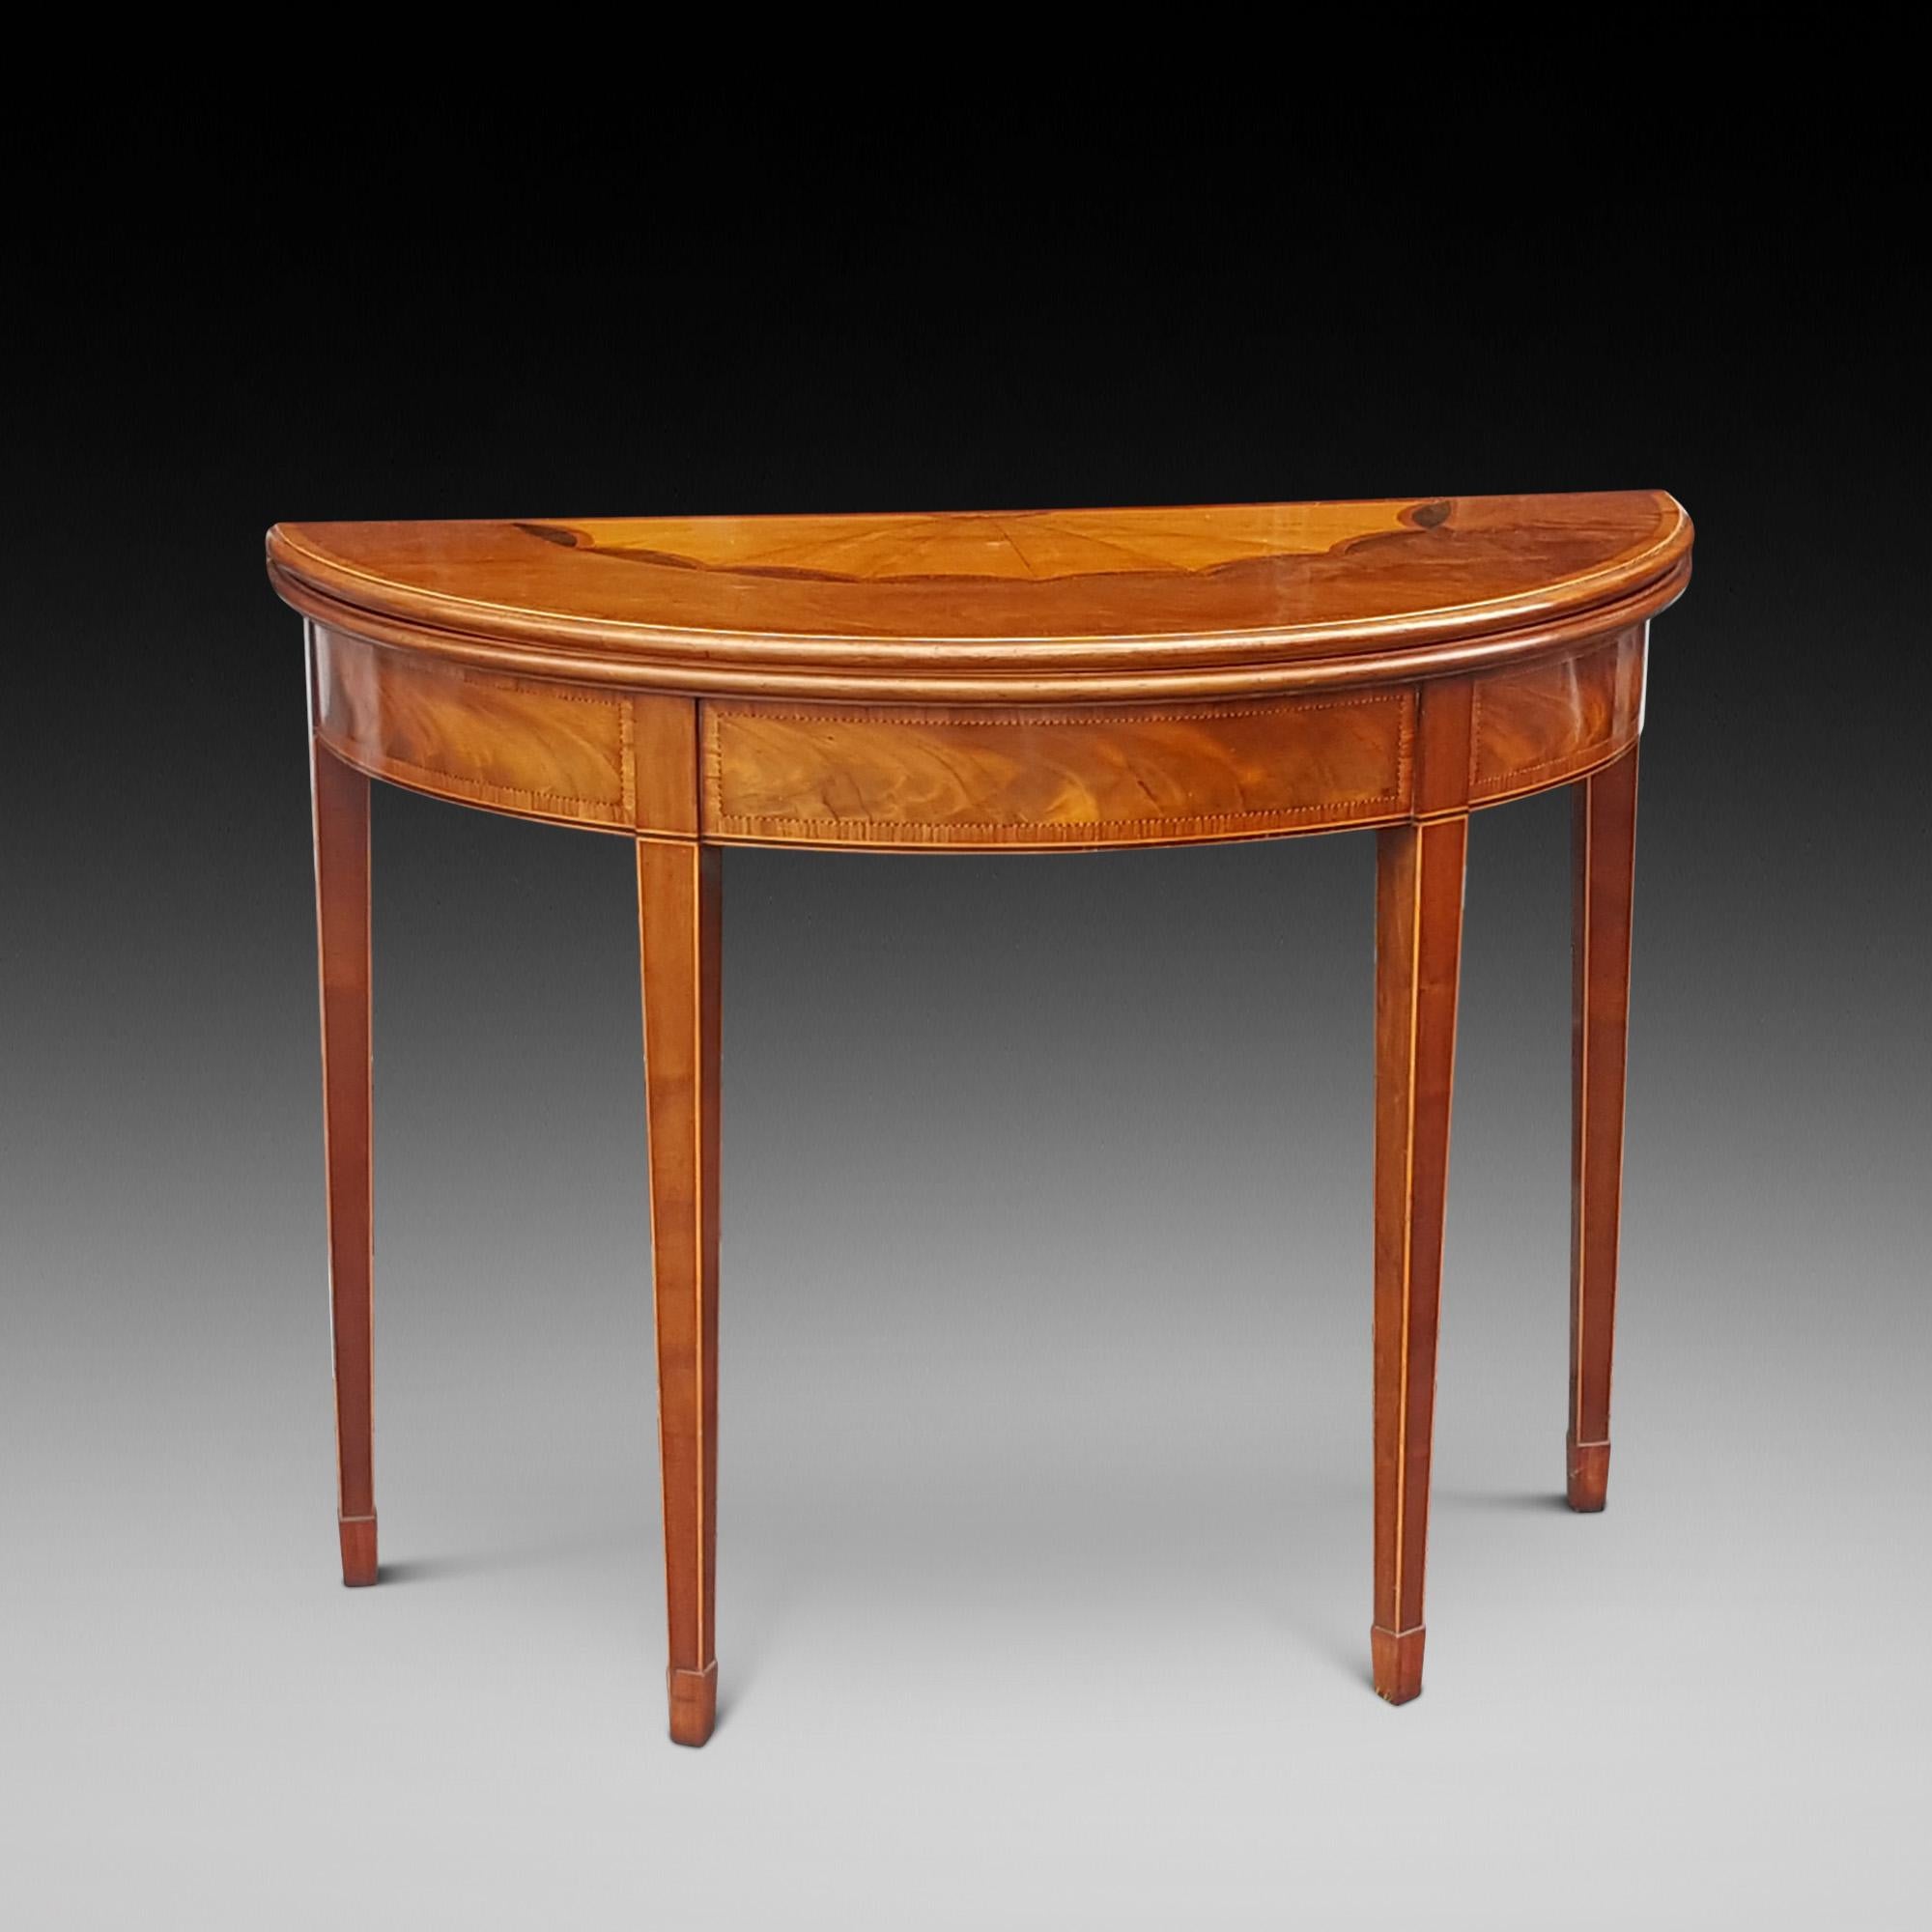 Late 18th century mahogany demilune tea table with satinwood and sycamore sunburst inlaid top on square tapered feet 38